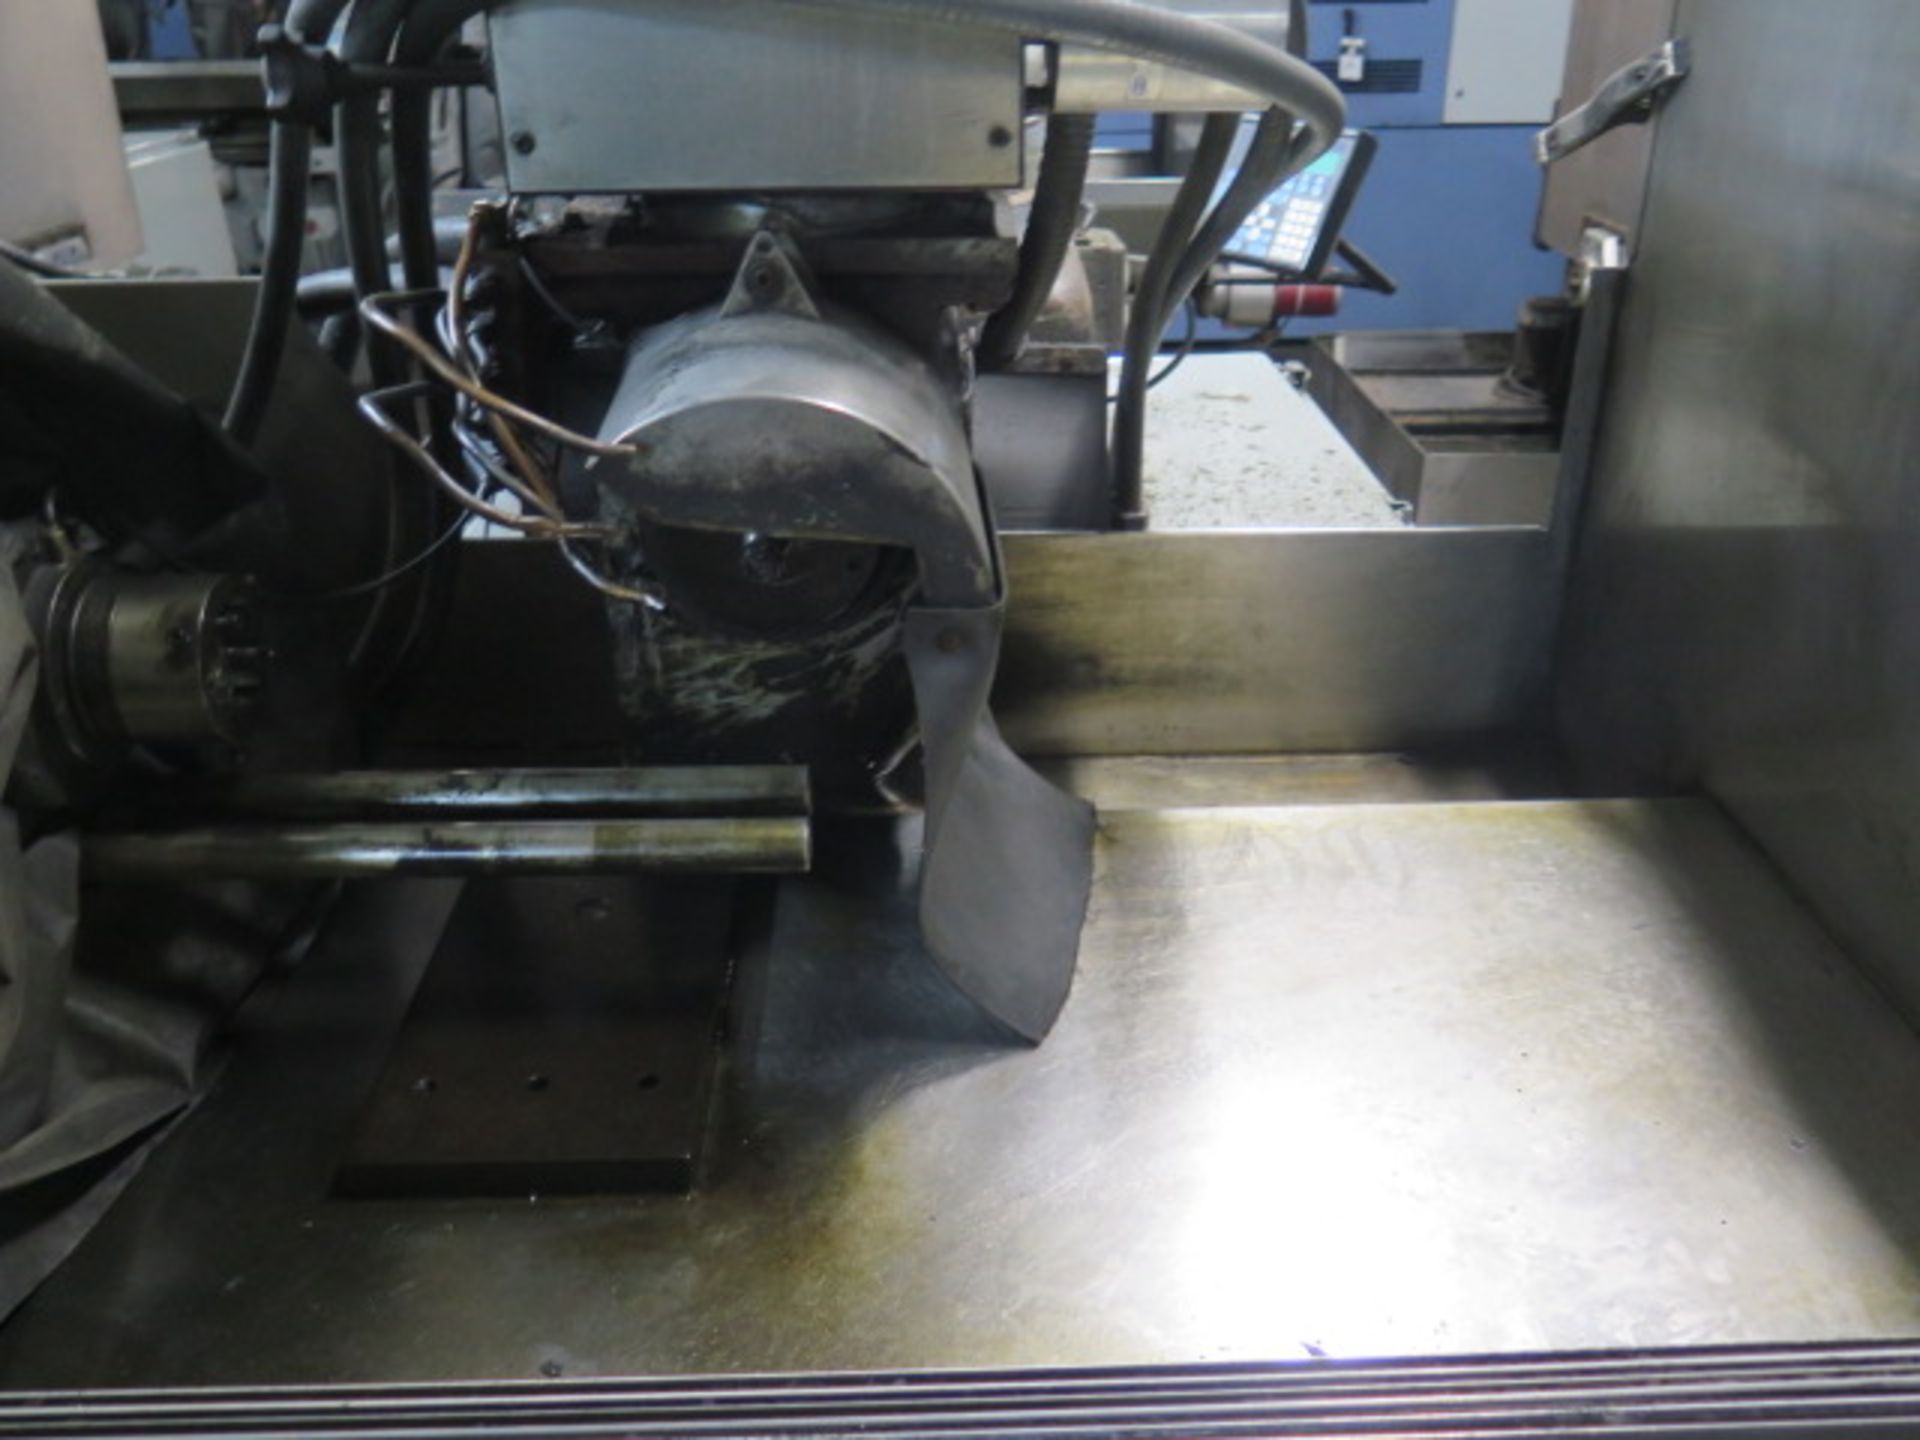 Custom 4-Axis CNC Tool and Cutter Grinders w/ Compumotor 4000 Controls (SOLD AS-IS - NO WARRANTY) - Image 9 of 11